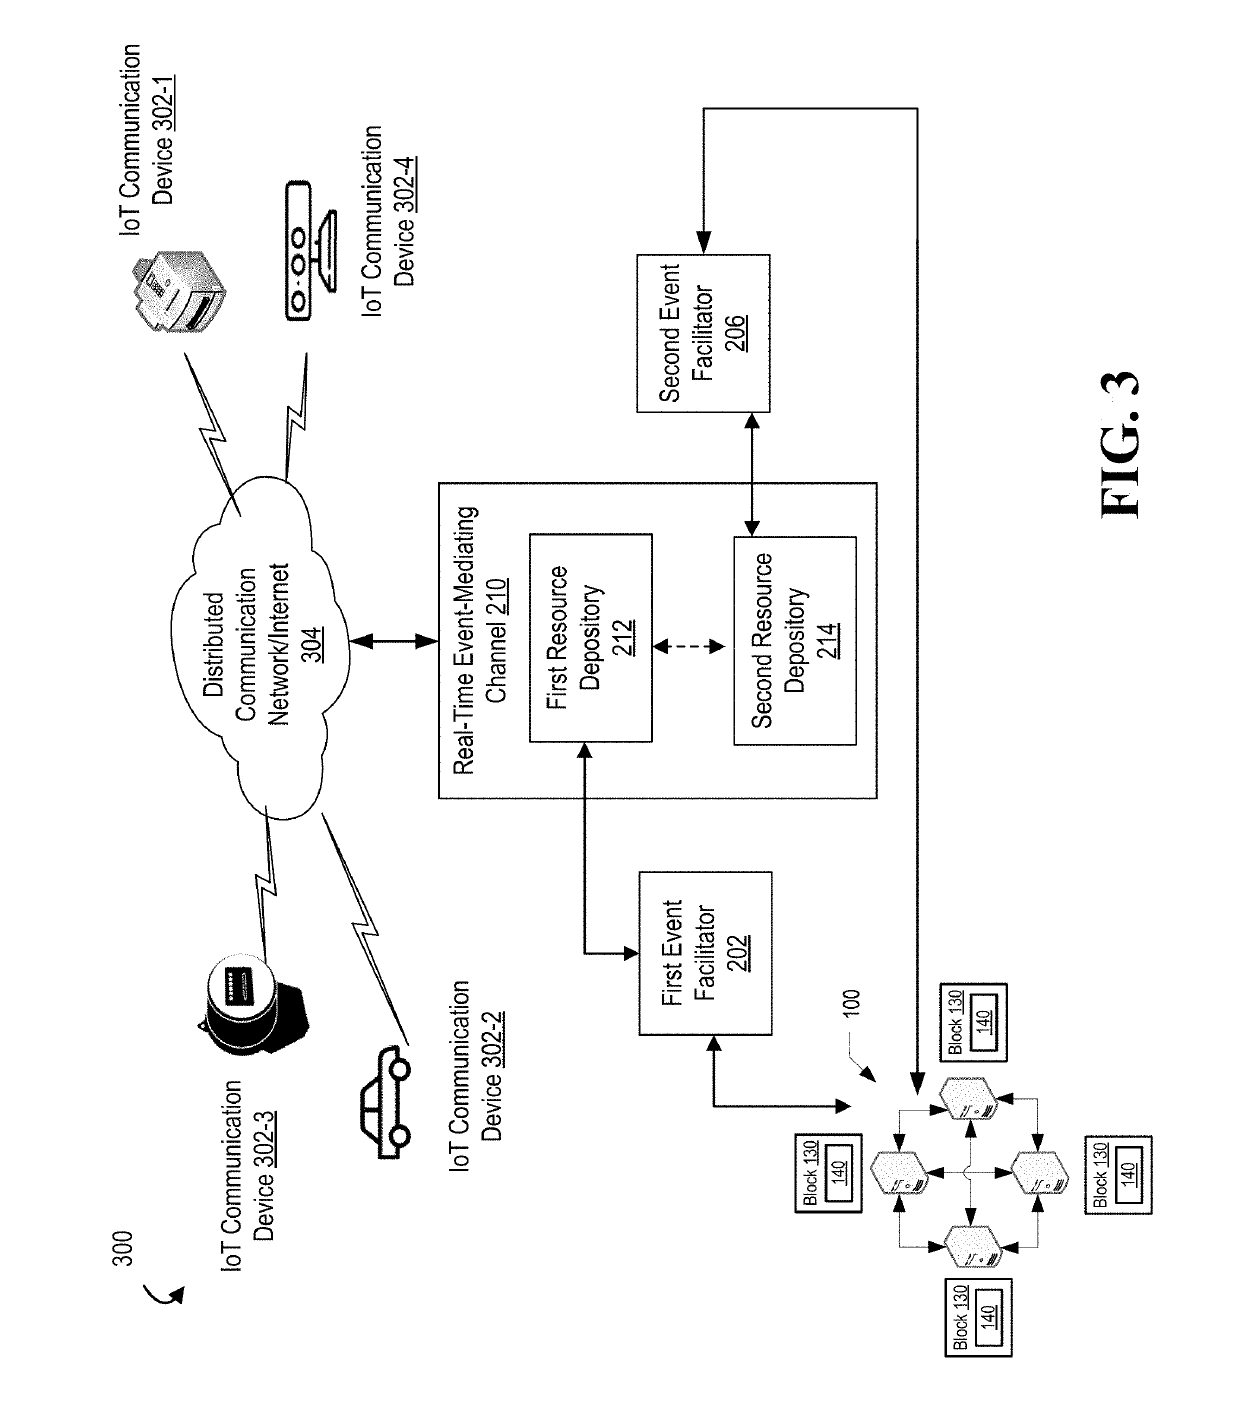 Internet-of-things enabled real-time event processing